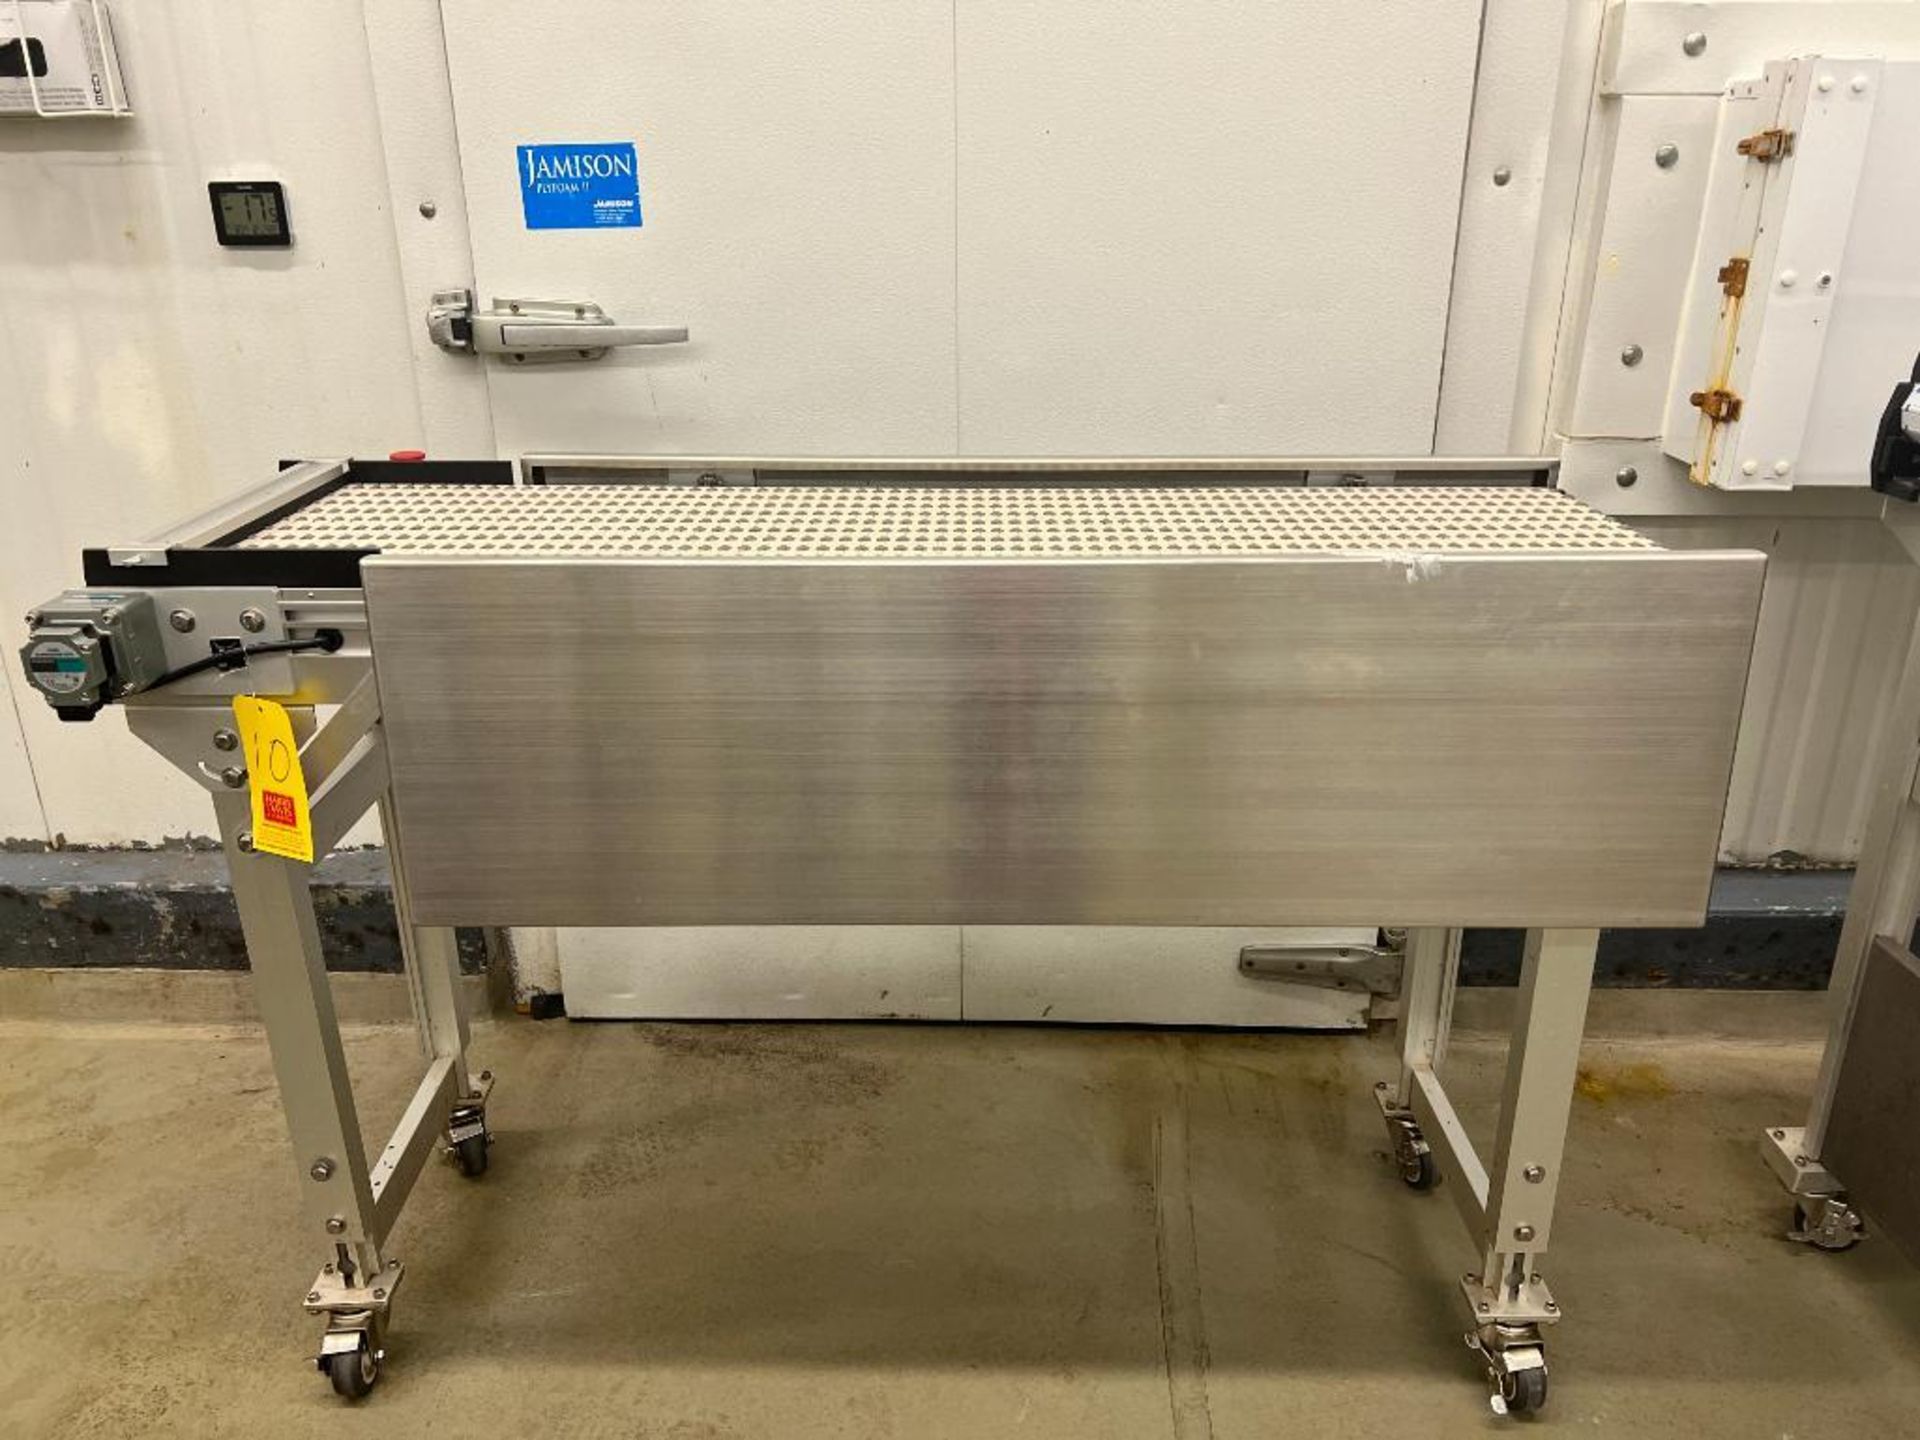 2020 SmartMove 5' x 15" S/S Framed Conveyor, Model: DX6-083-15-8505, S/N: 7201-4 with Integrated